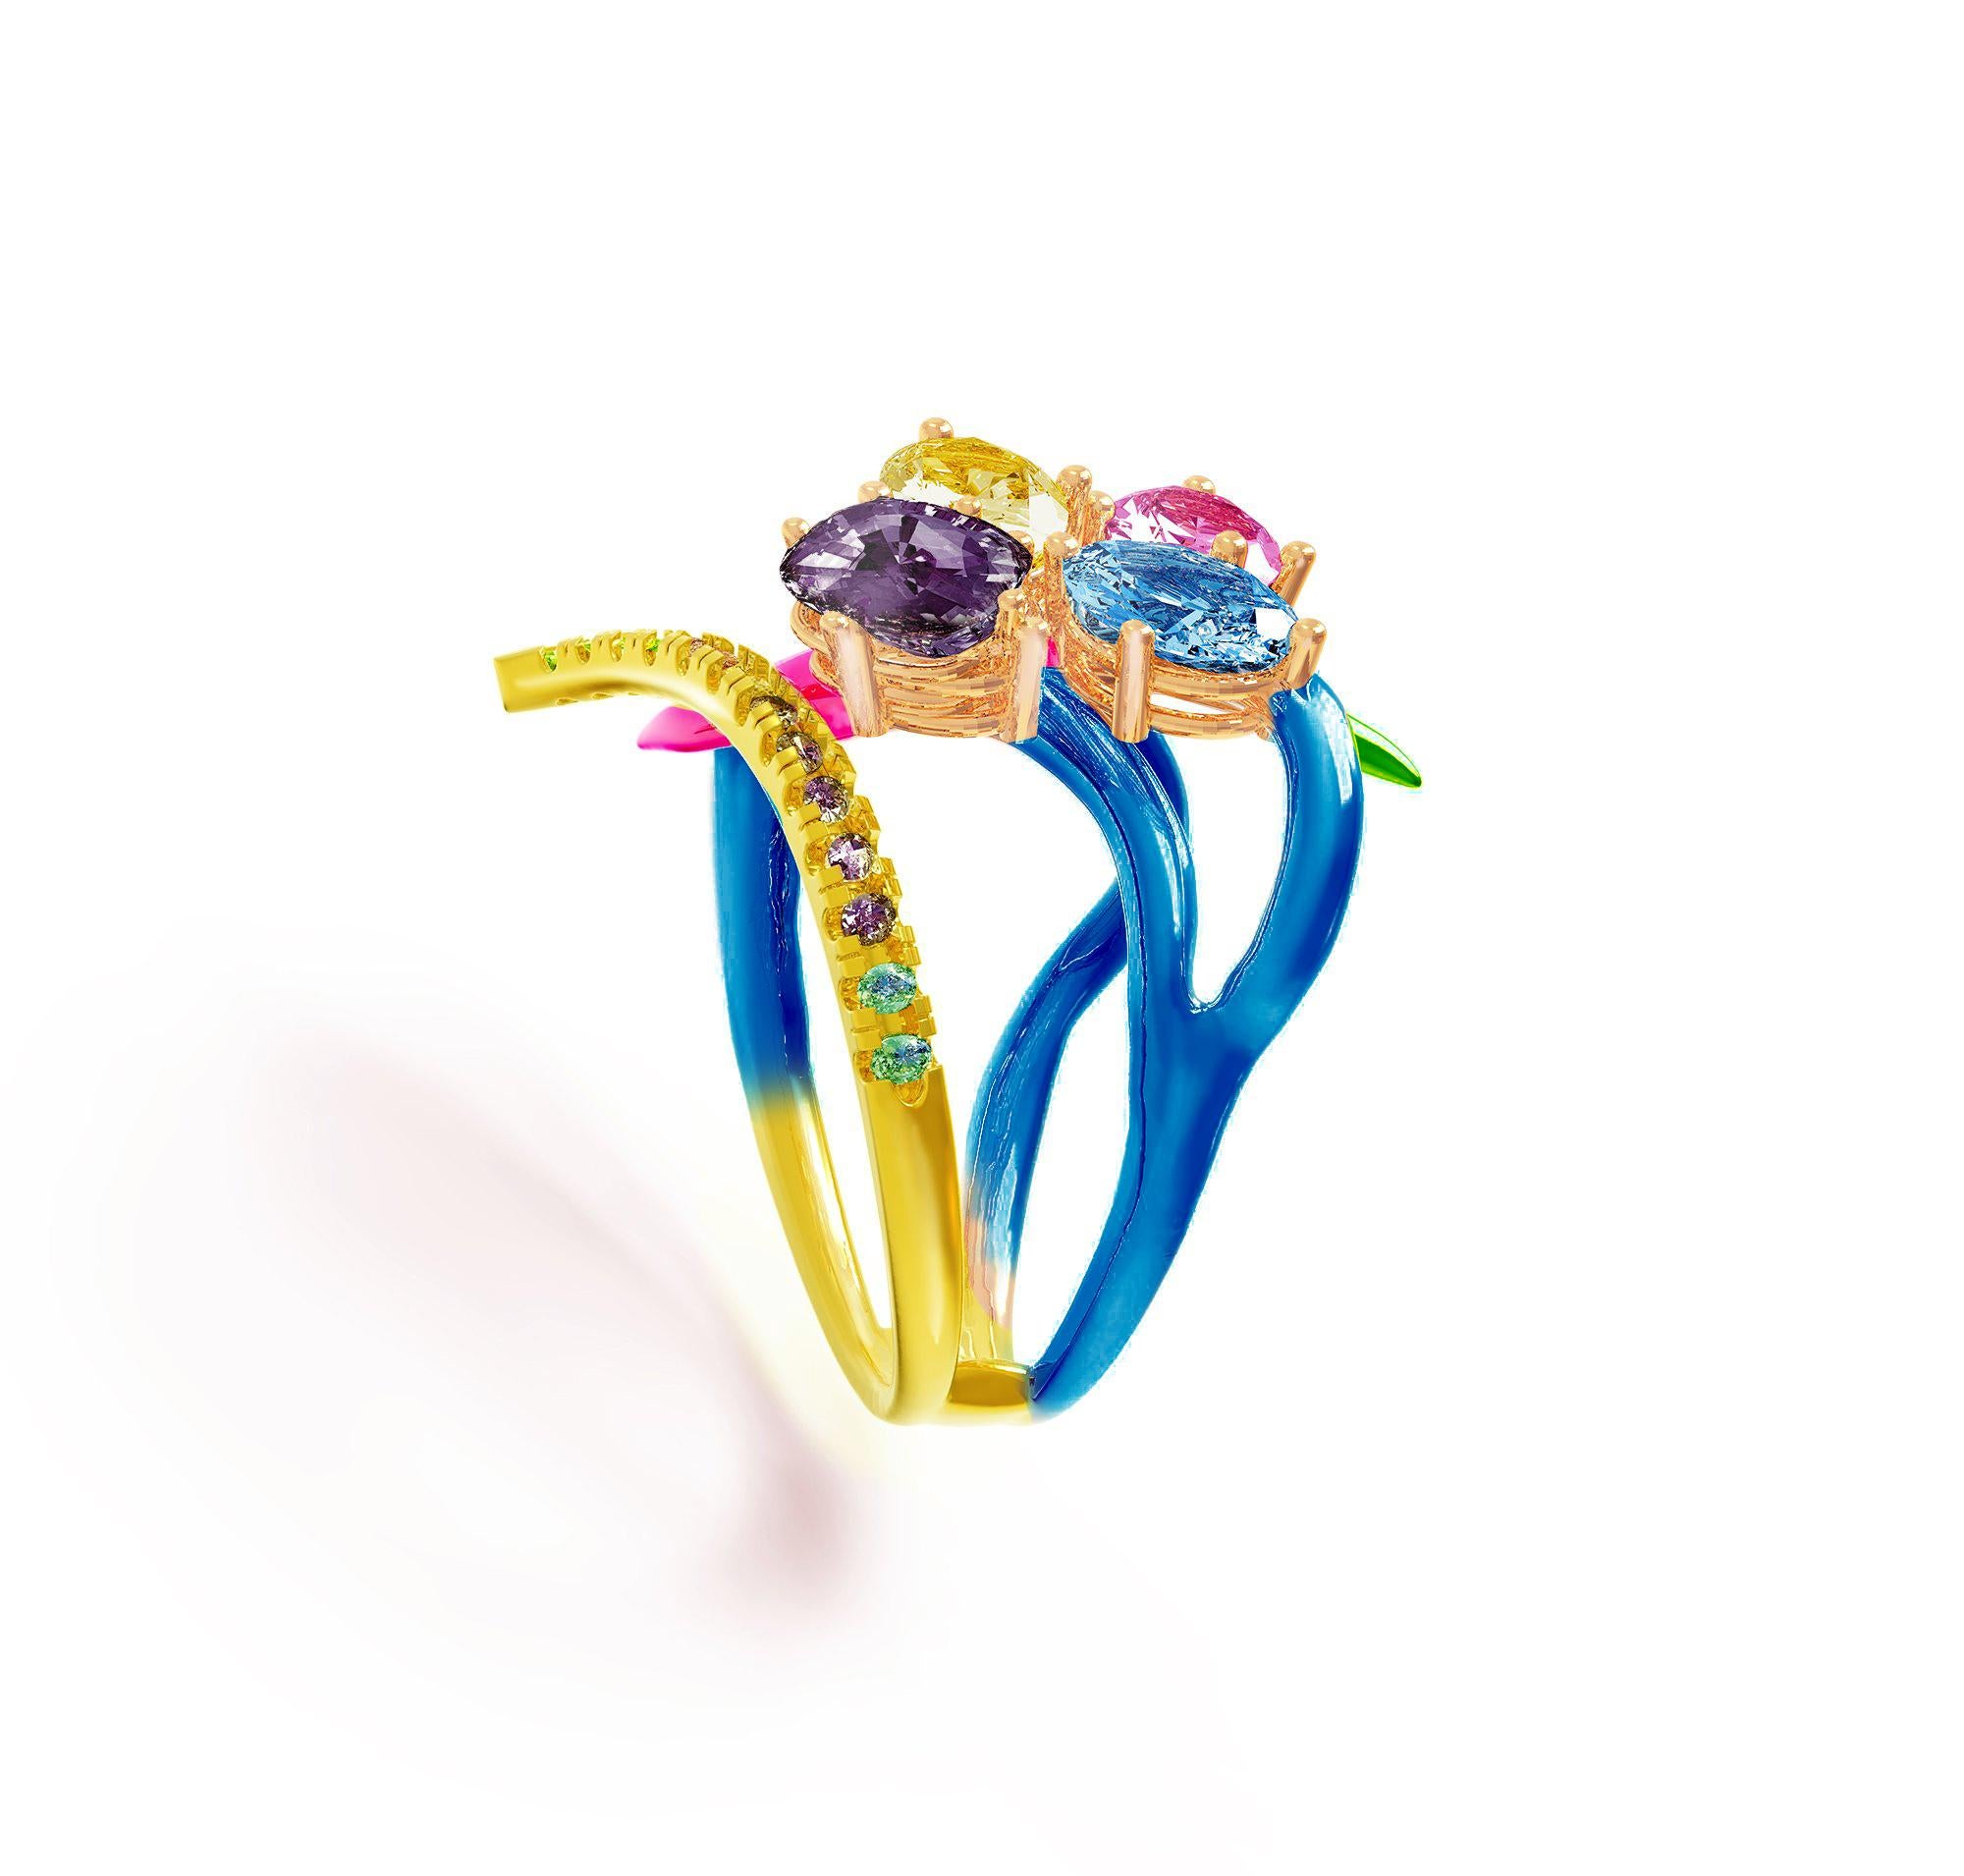 This Harajuku contemporary enamel ring is made of 18 karat yellow gold with natural gems on your choice custom made.
The gems are:
Oval or pear cut pink sapphire, 2,17 carats;
Unheated untreated yellow sapphire in oval cut, 1,61 carats;
Blue swiss